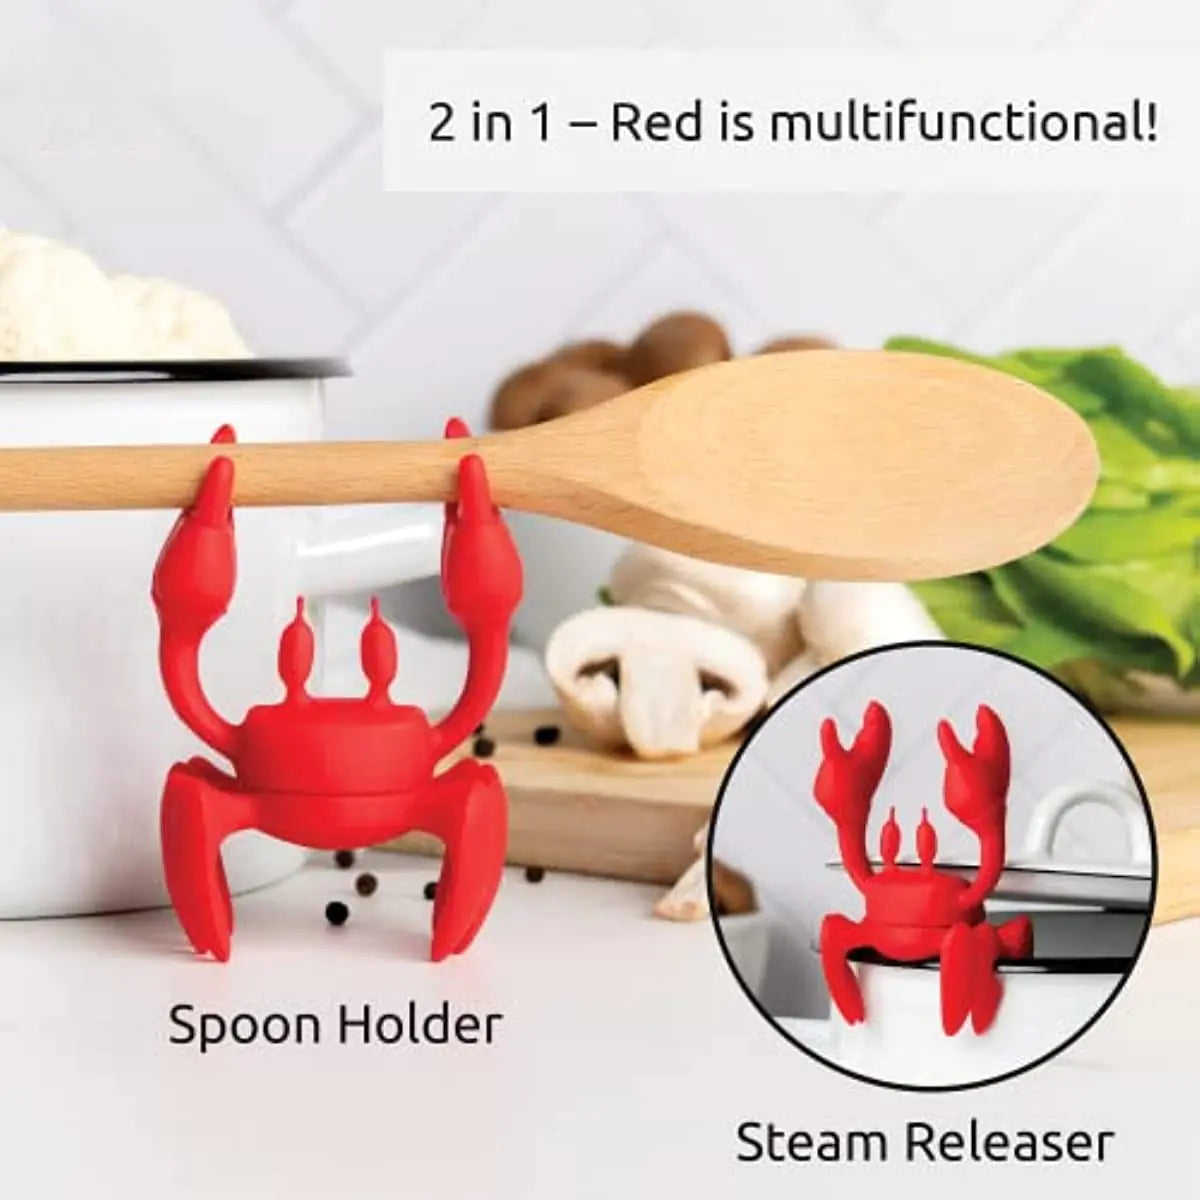 "Flexible and durable silicone spoon for your kitchen."